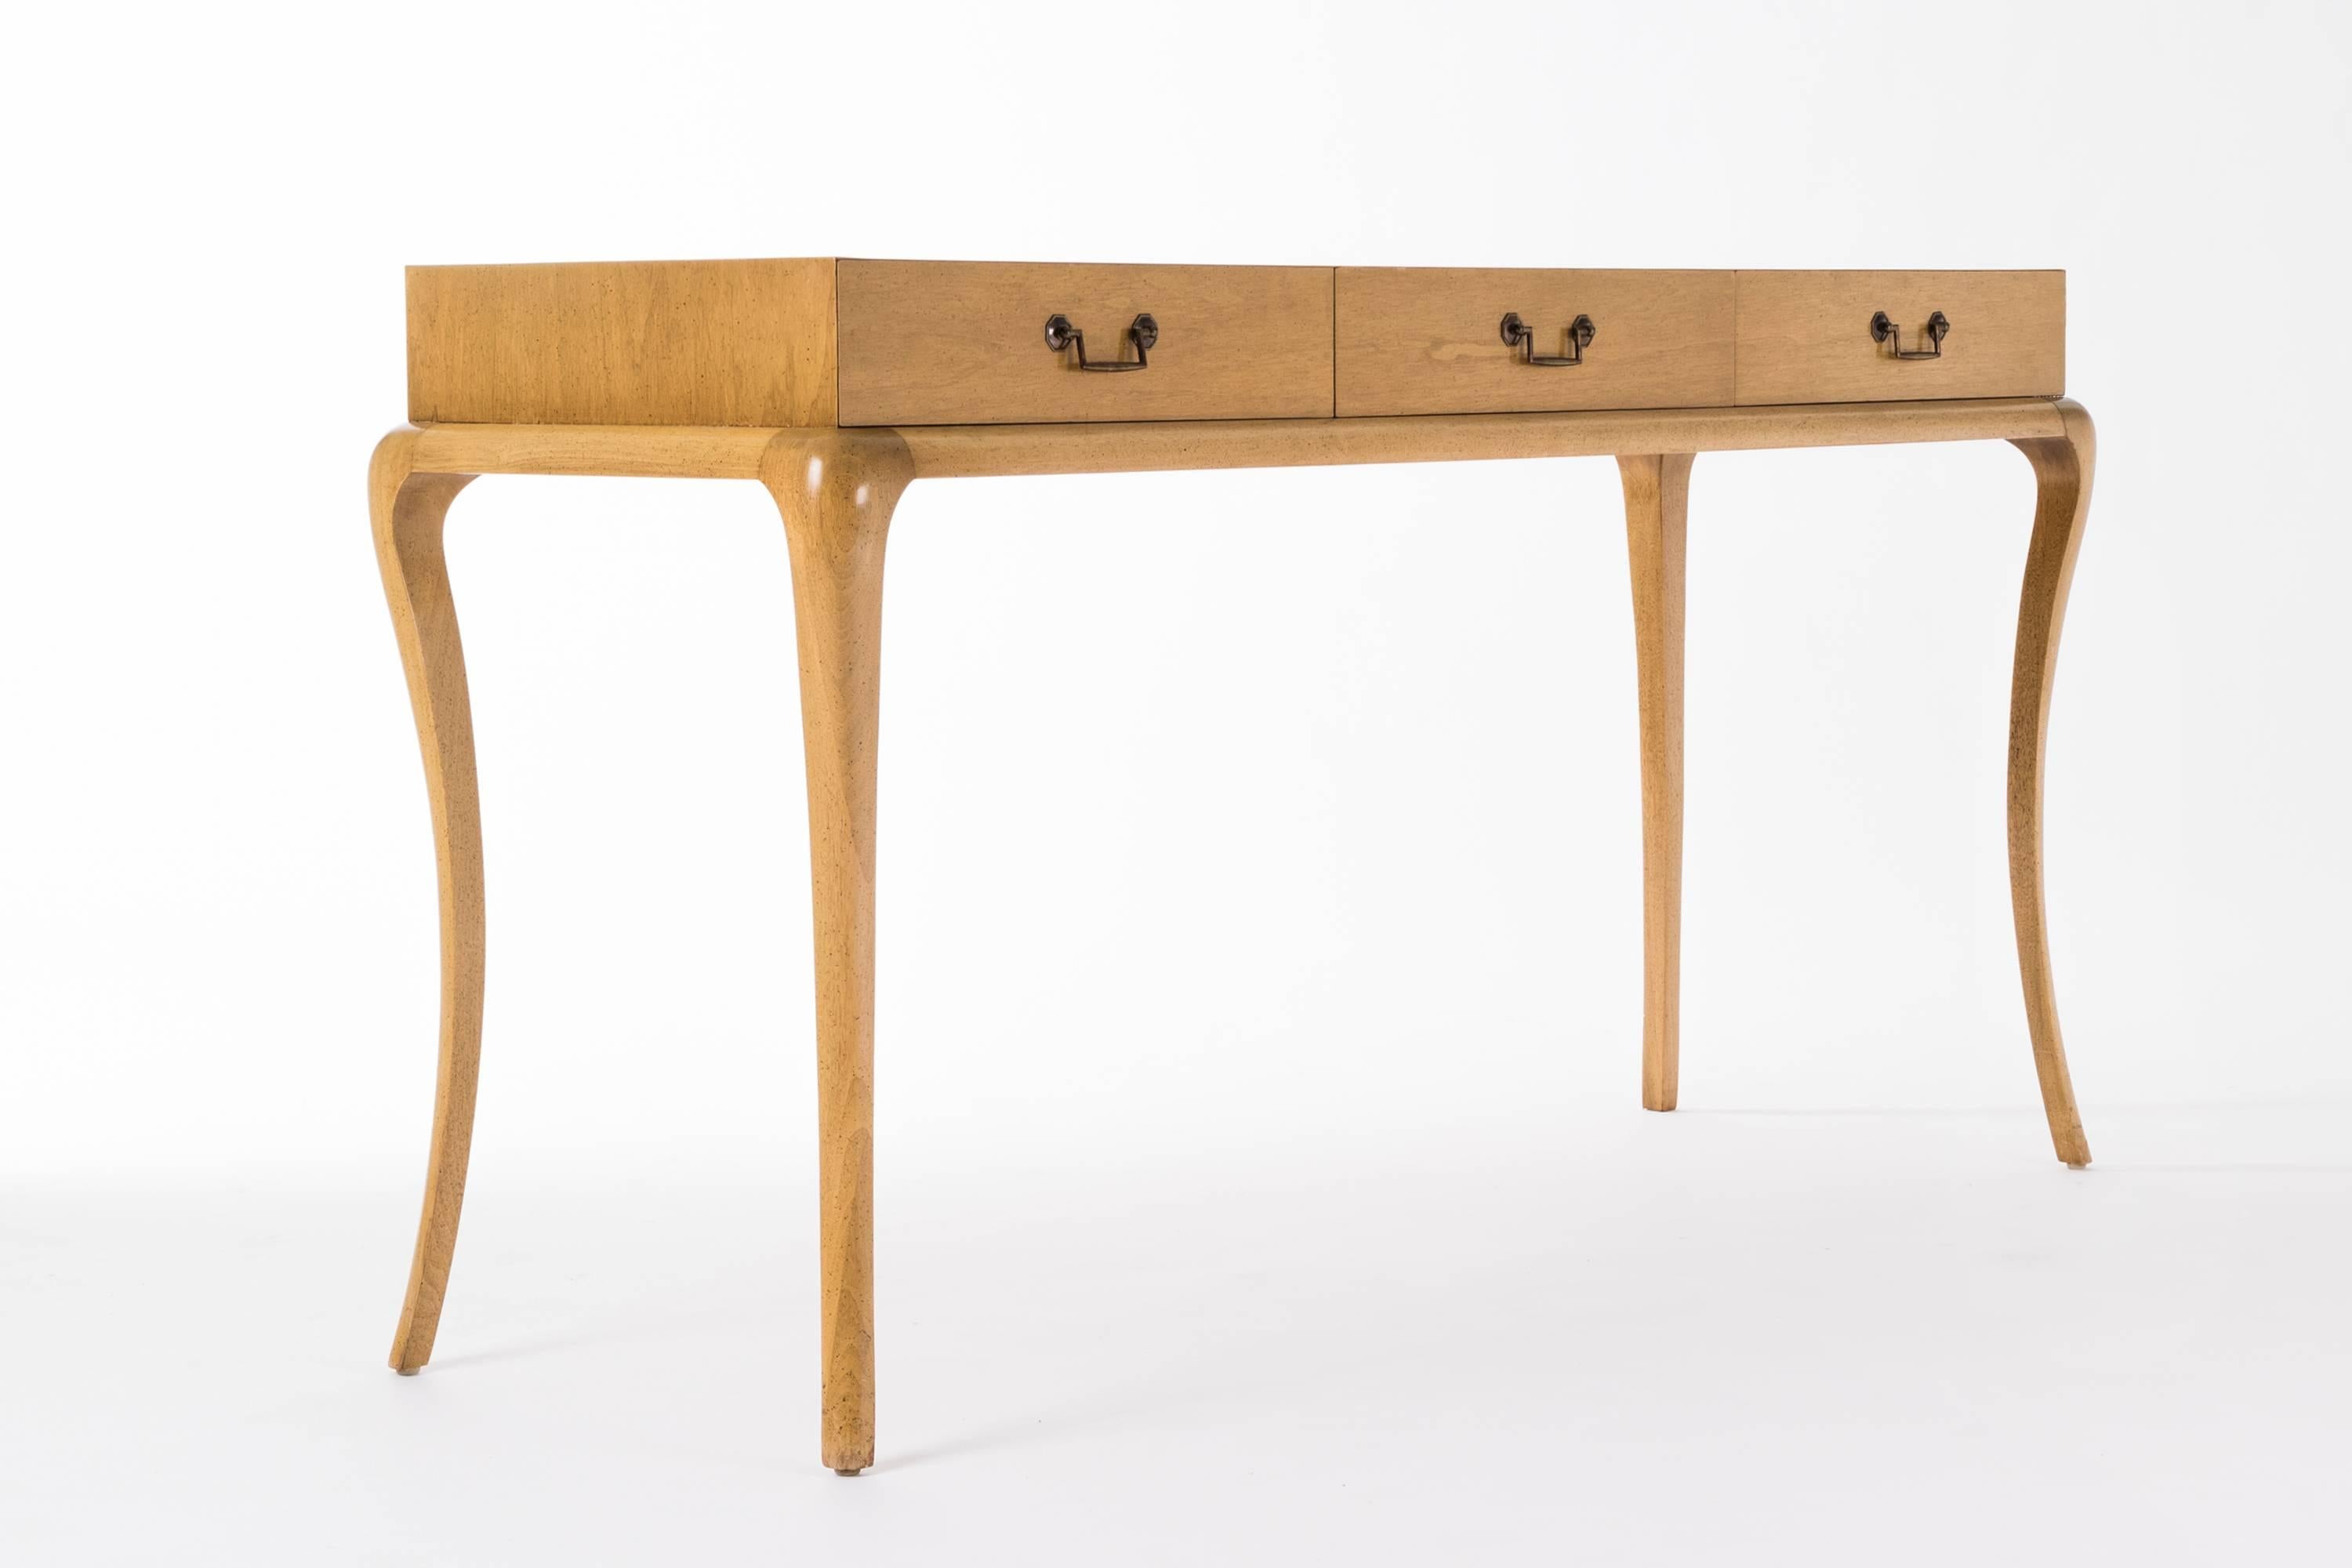 Parzinger originals, three-drawer console, lacquered maple wood with curved saber legs and brass pulls.
  